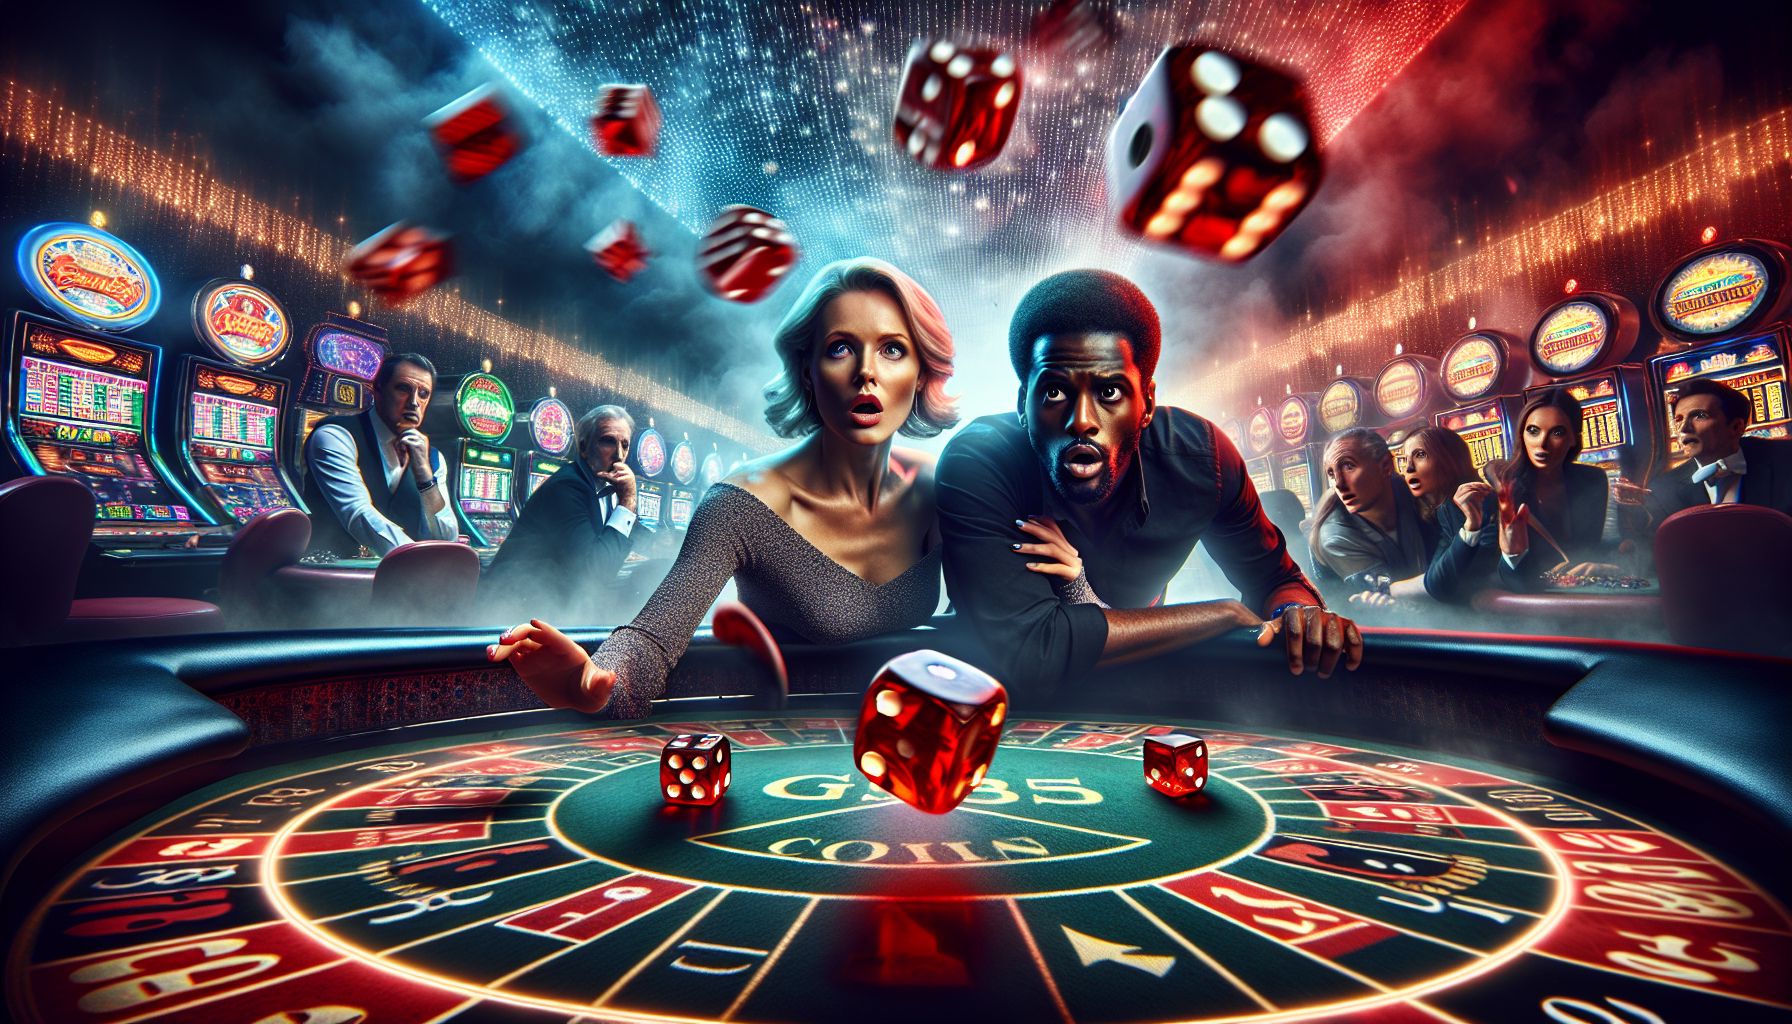 Craps Chronicles: Rolling the Dice of Destiny